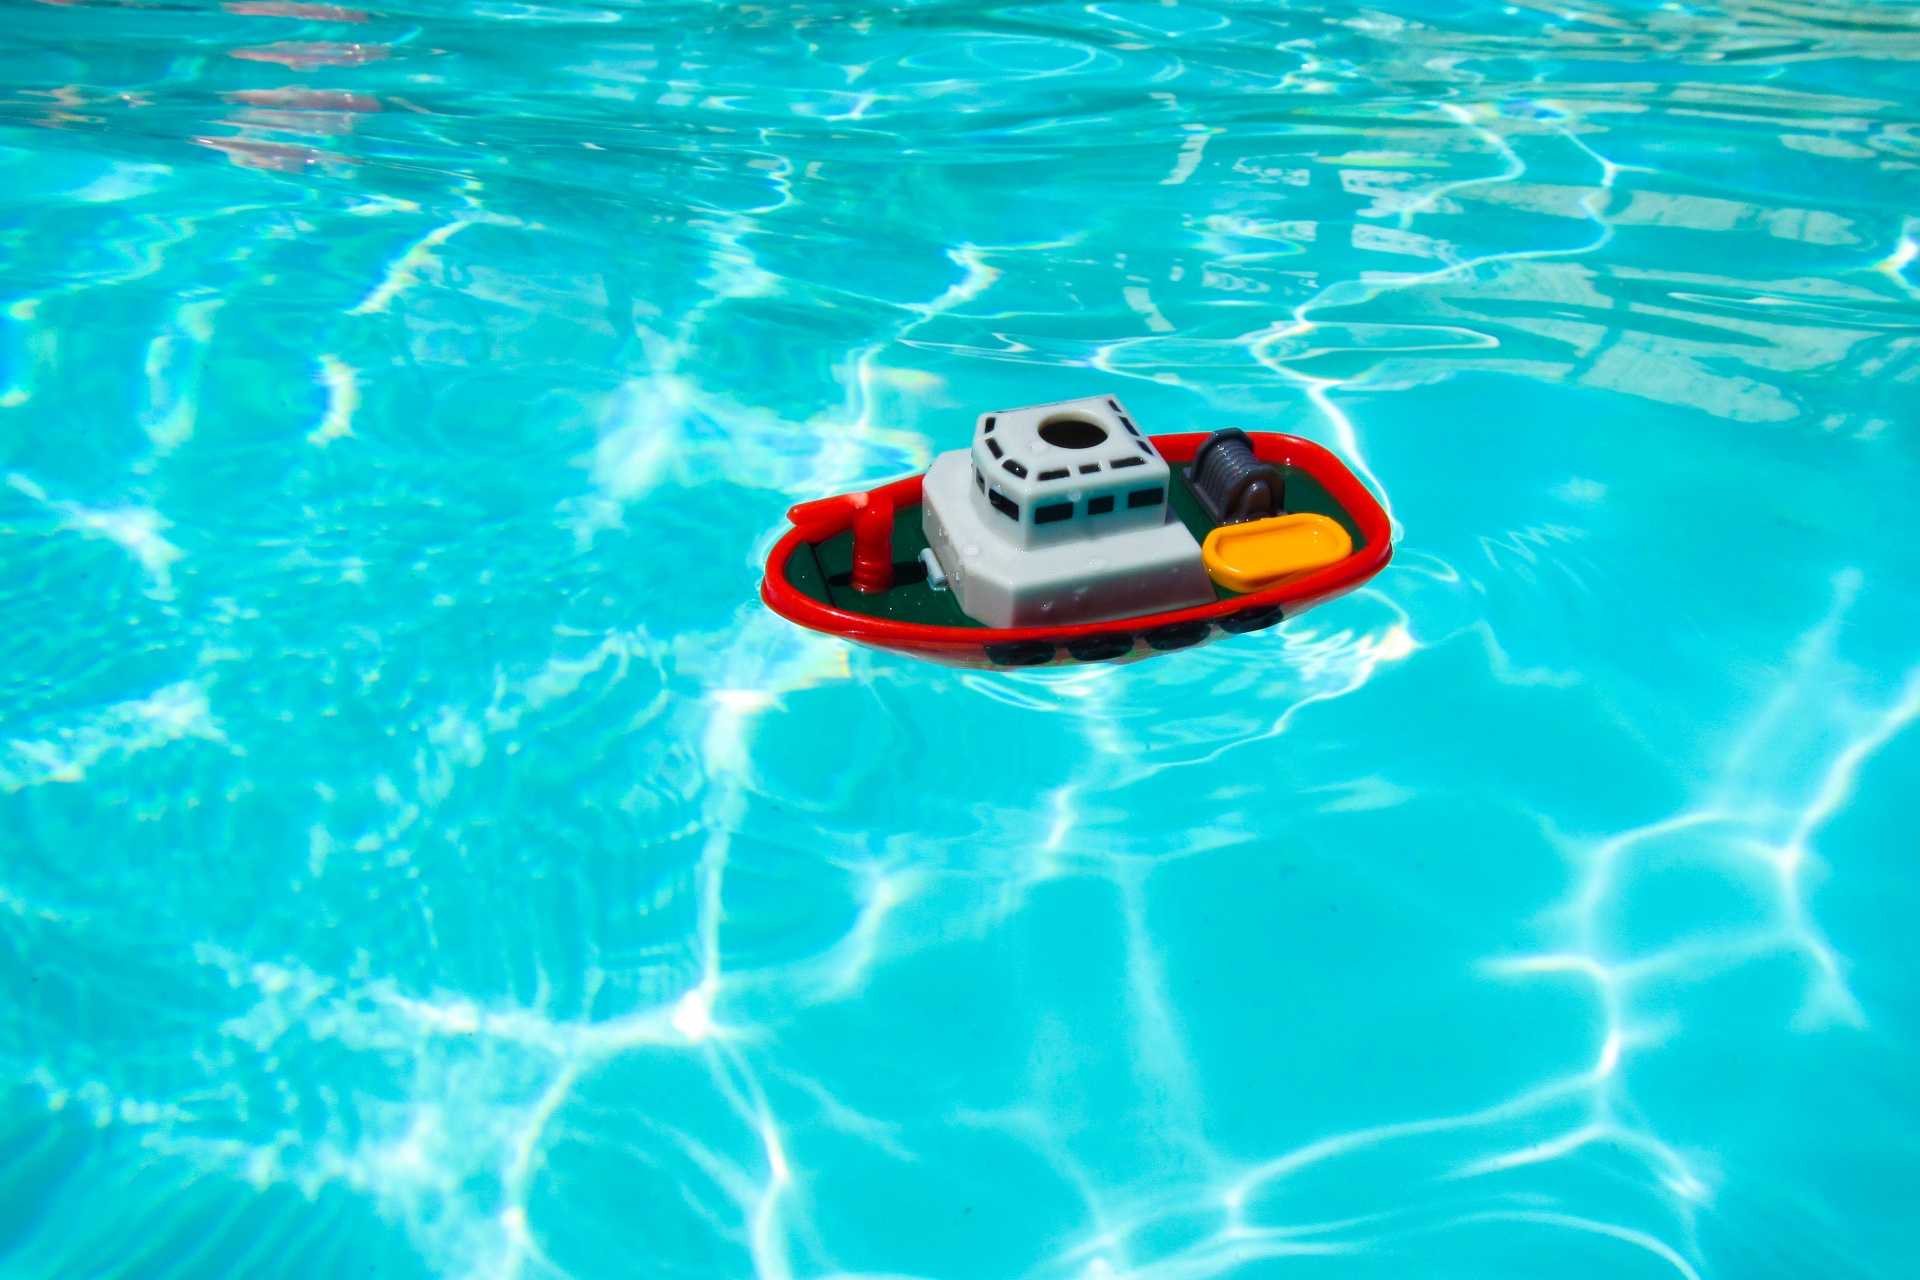 Toy Boat In Pool Free Stock Photo - Public Domain Pictures